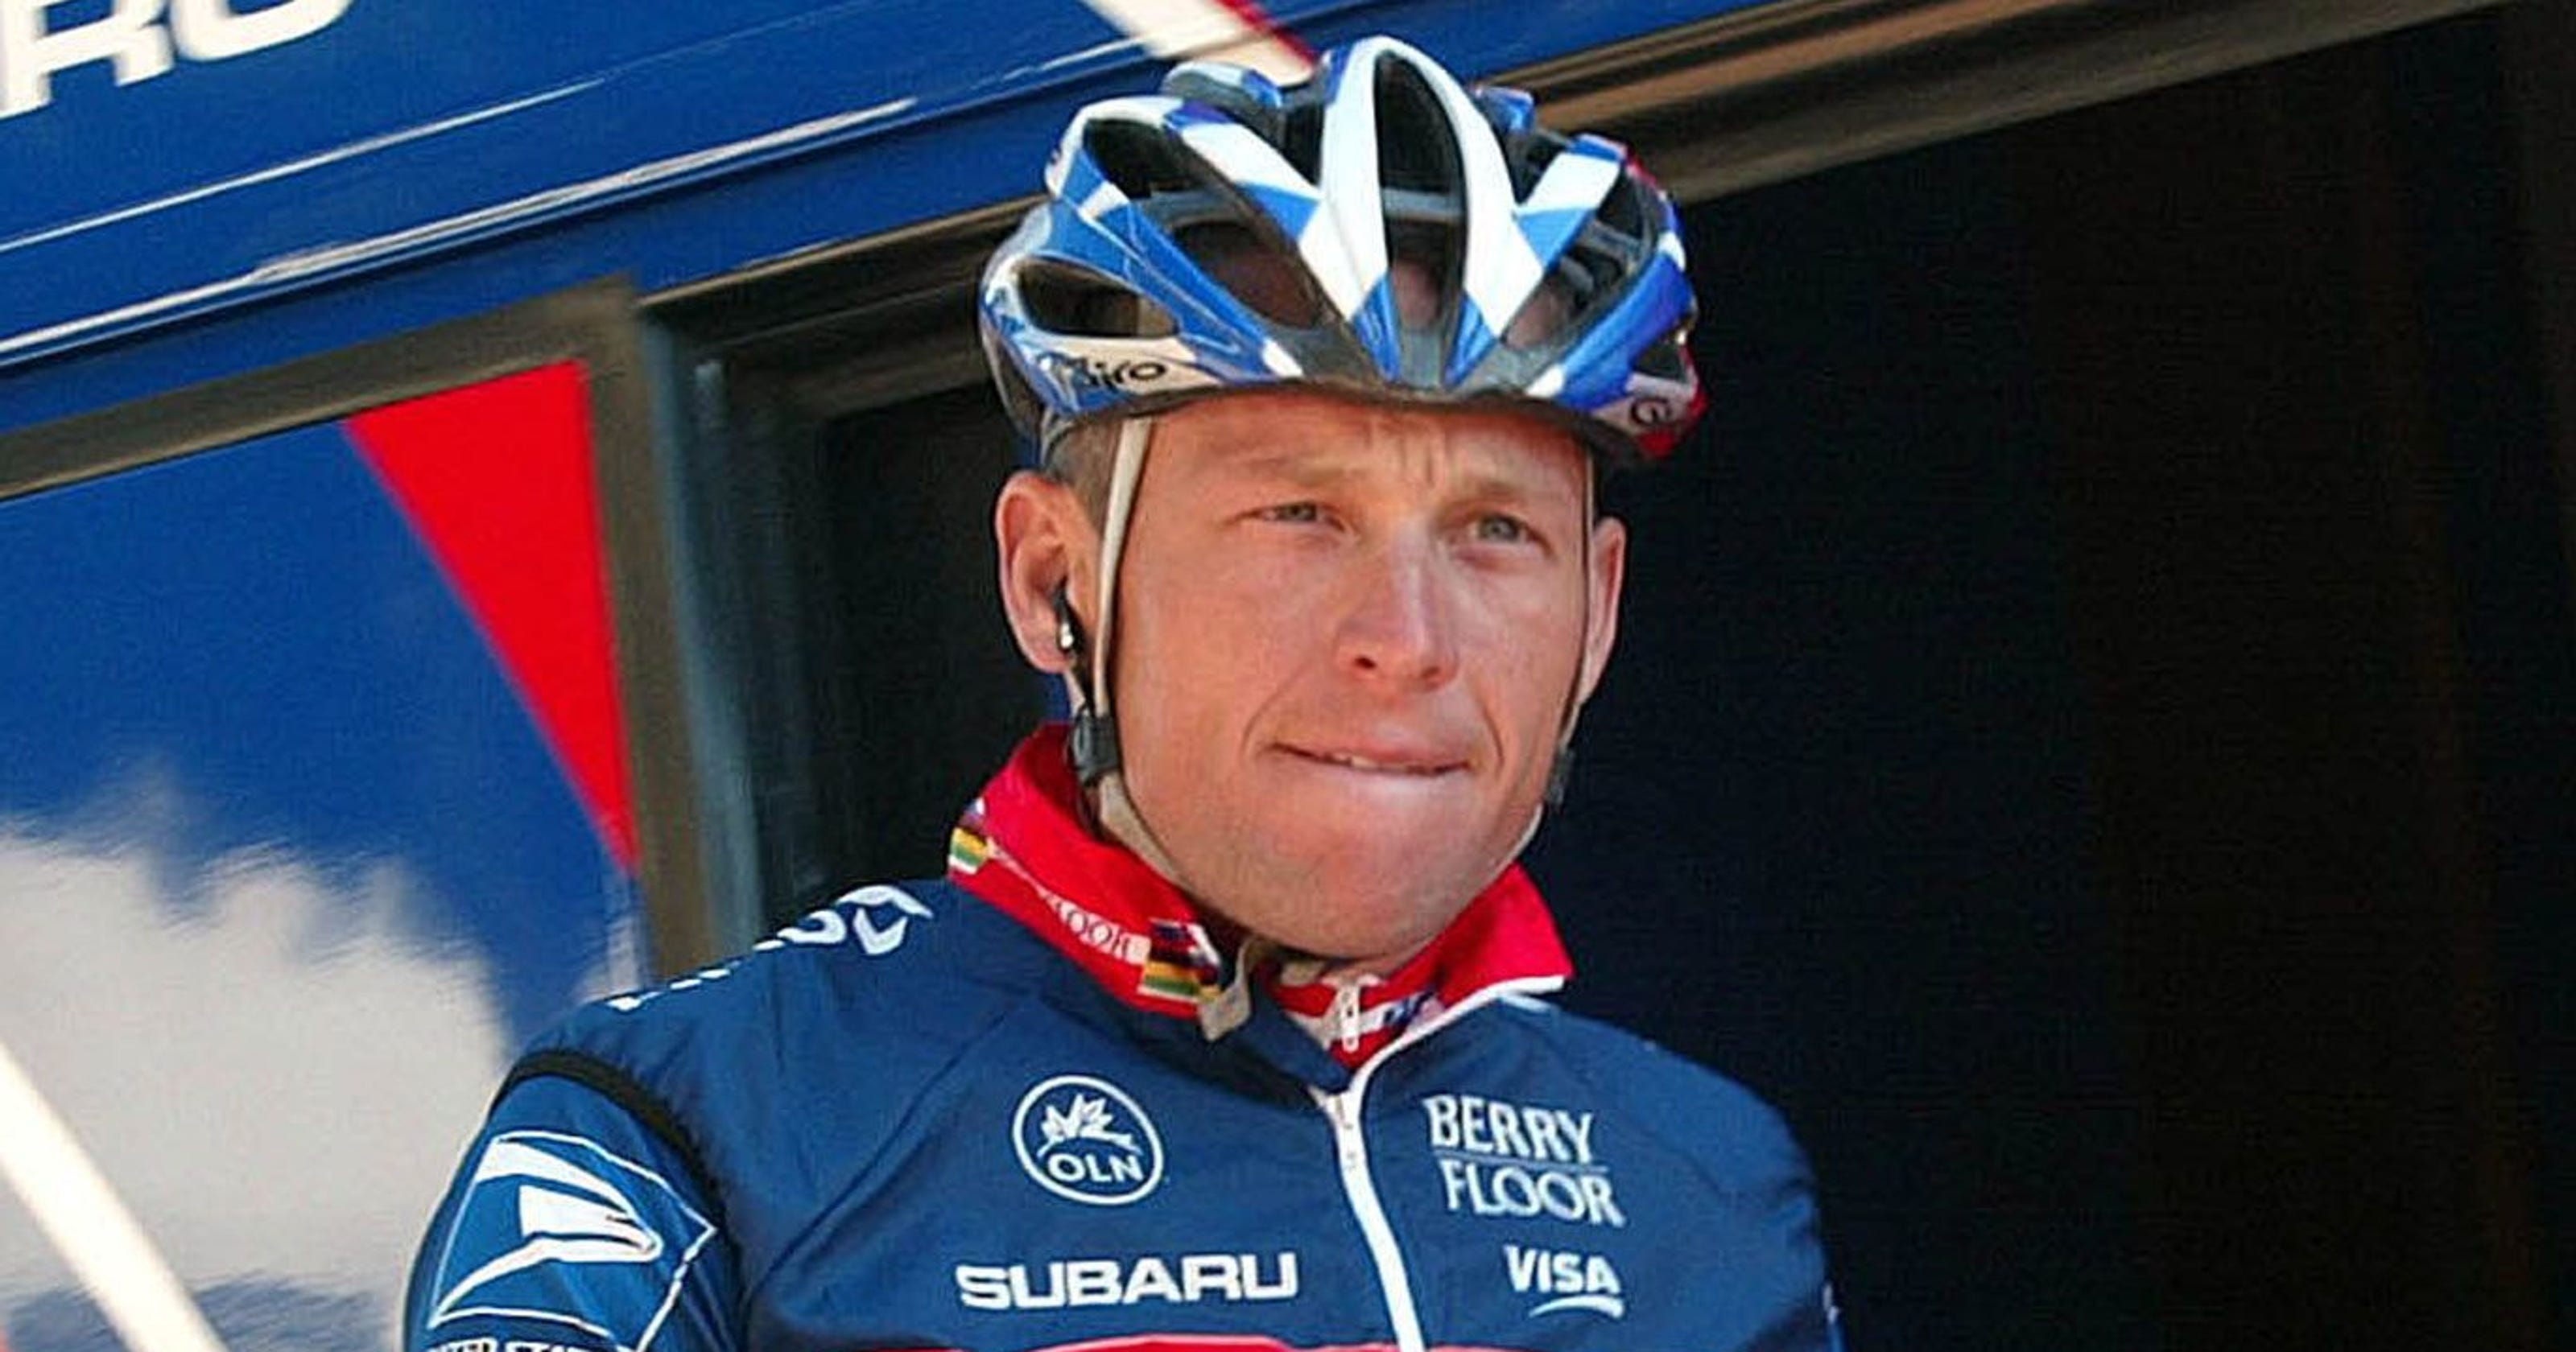 Lance Armstrong Is A Farce A Cheater Nbc Sports Shouldnt Air Interview